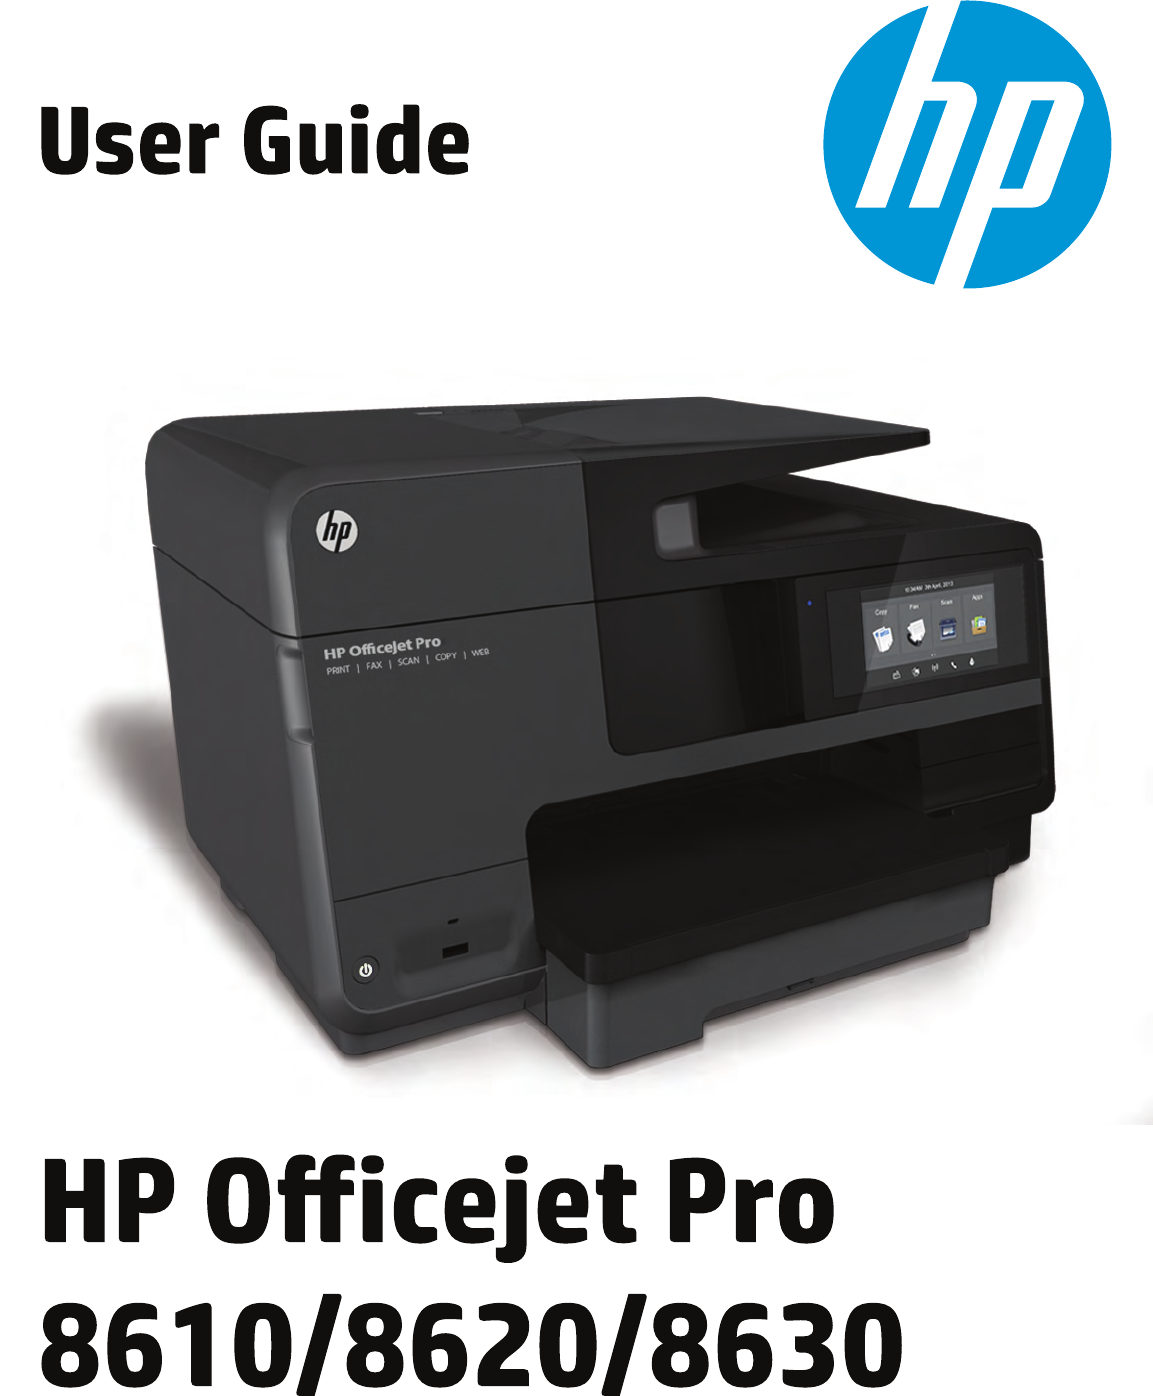 install hp officejet pro 8610 to computer